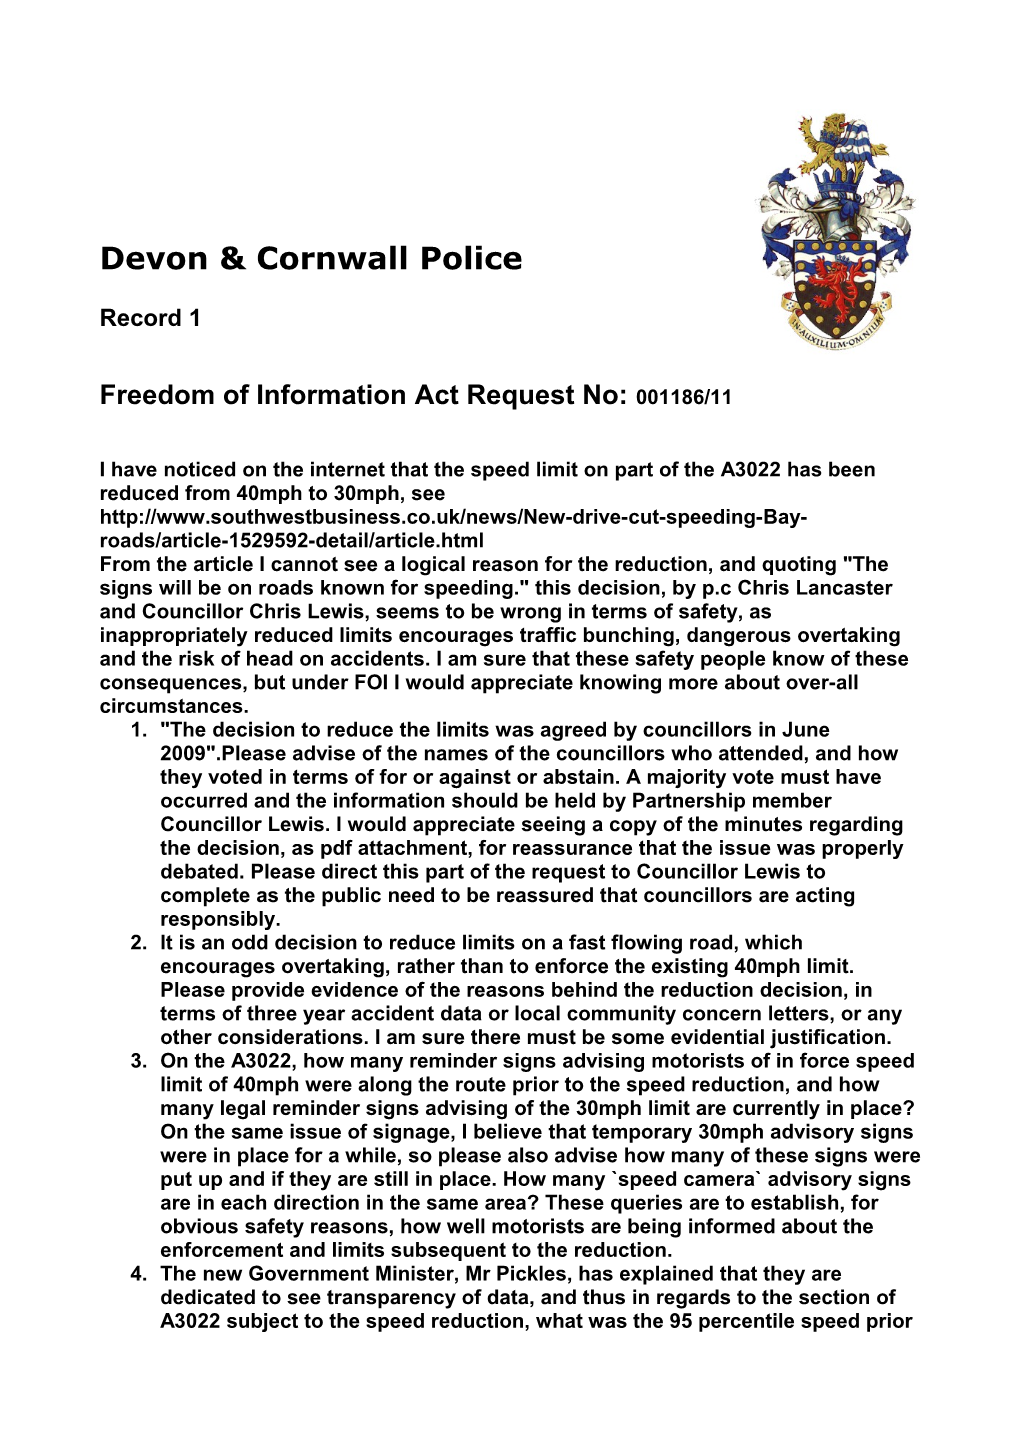 Freedom of Information Act Request No:001186/11